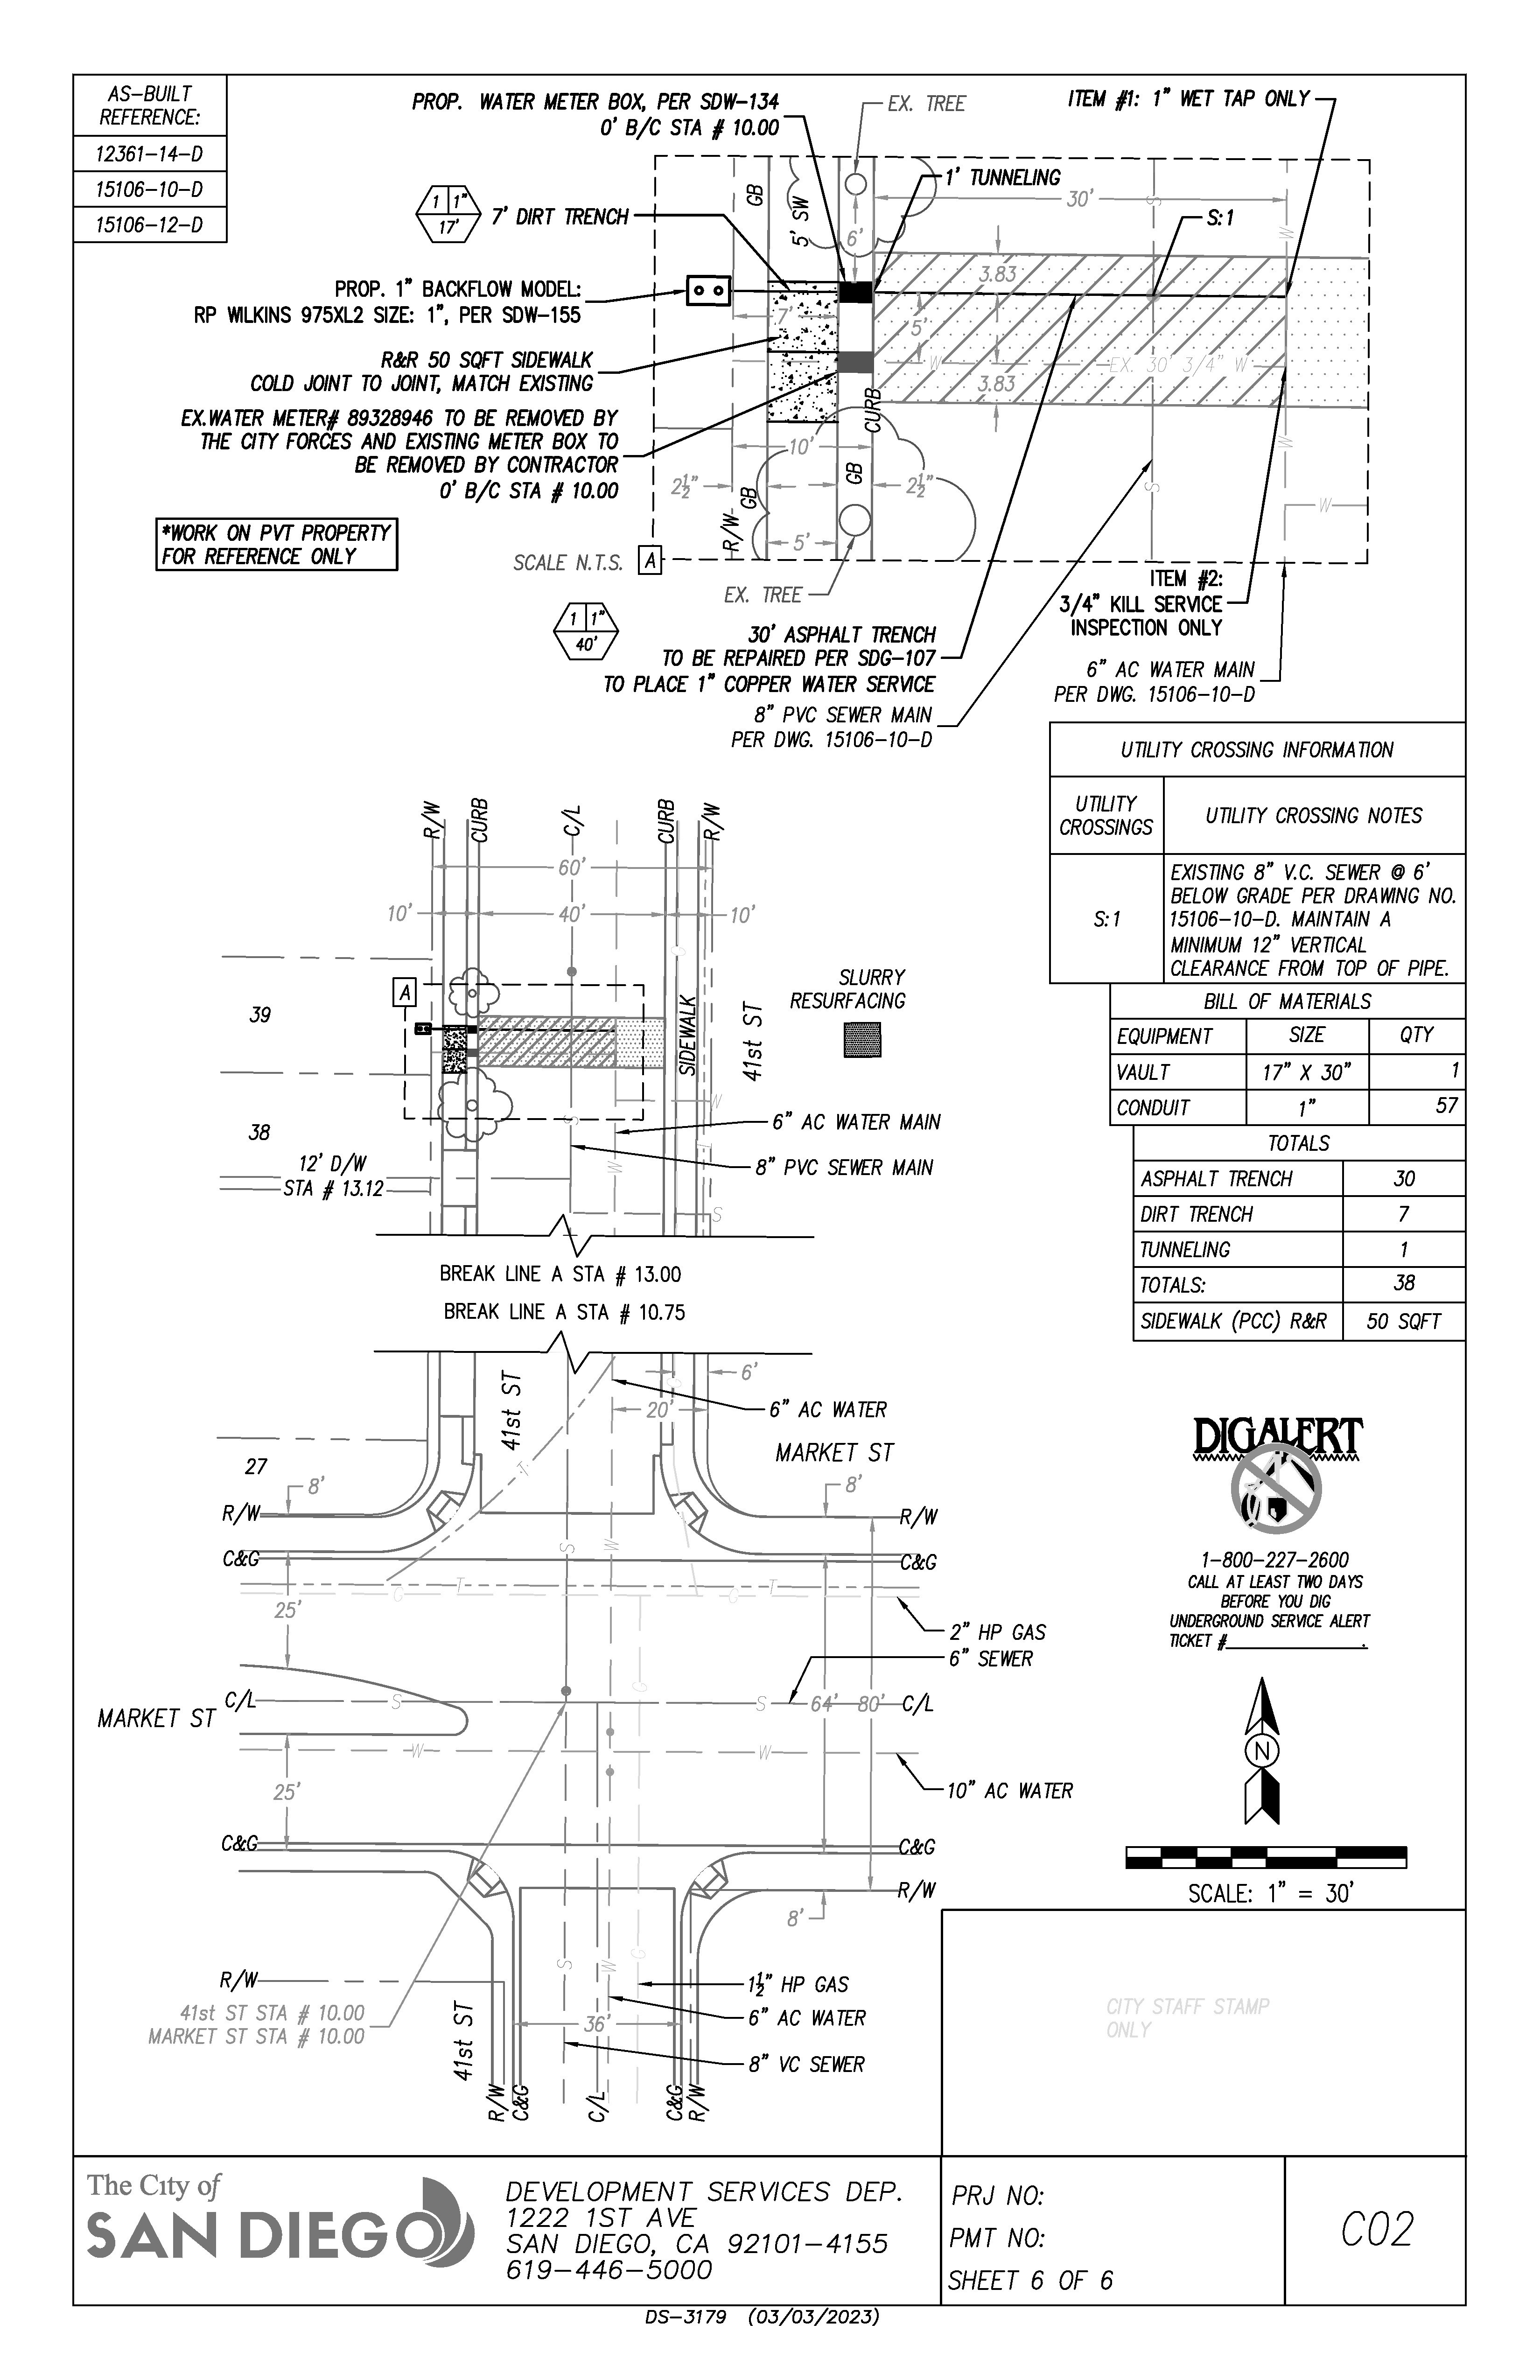 an image of an example construction drawing